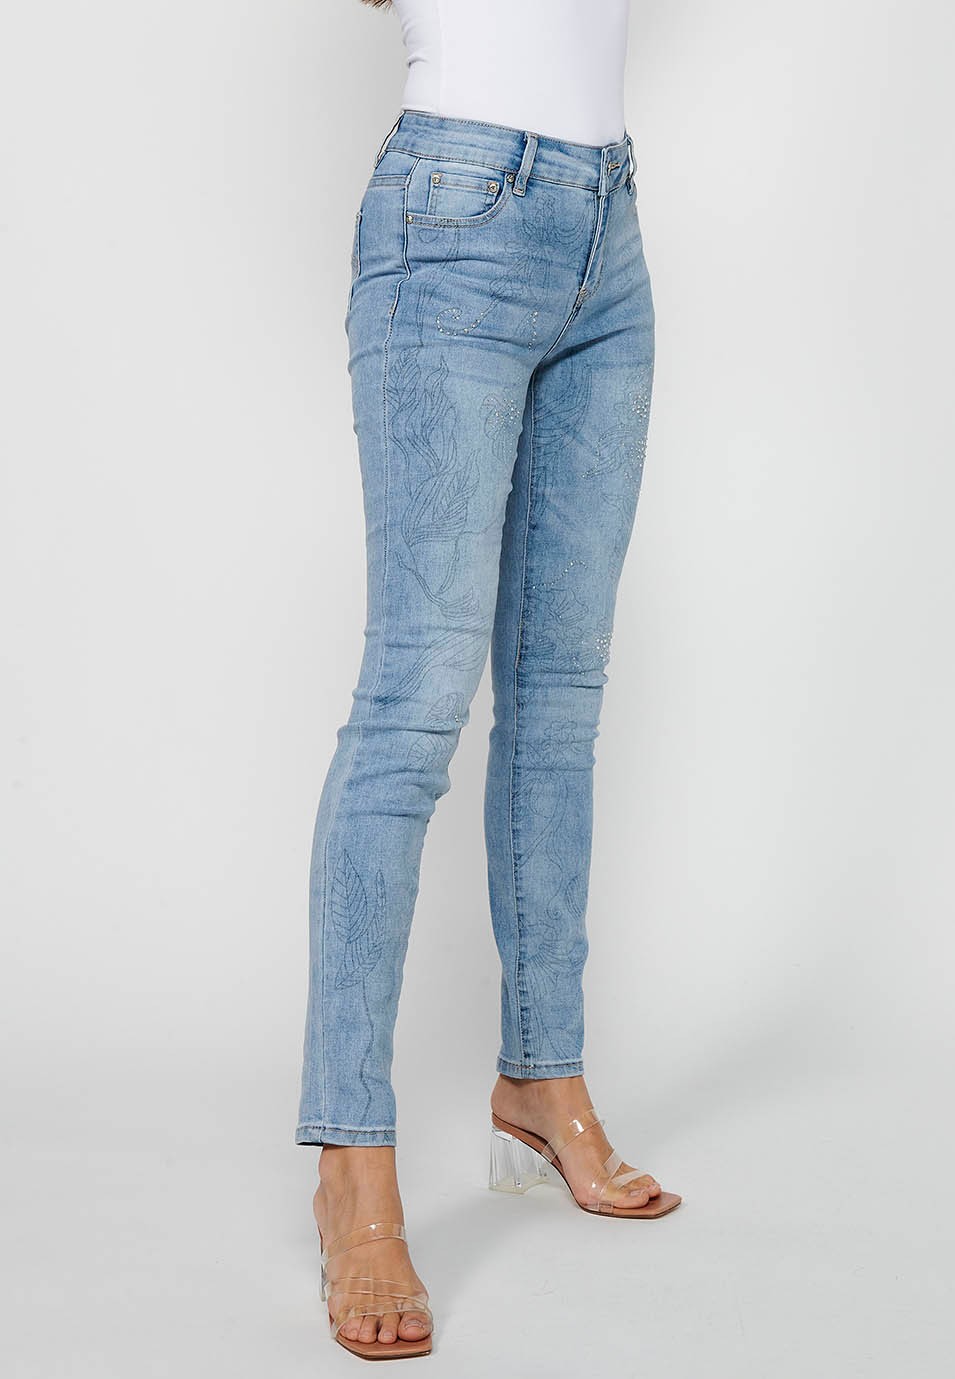 Long slim denim pants with floral details and front closure with zipper and button in Light Blue for Women 4